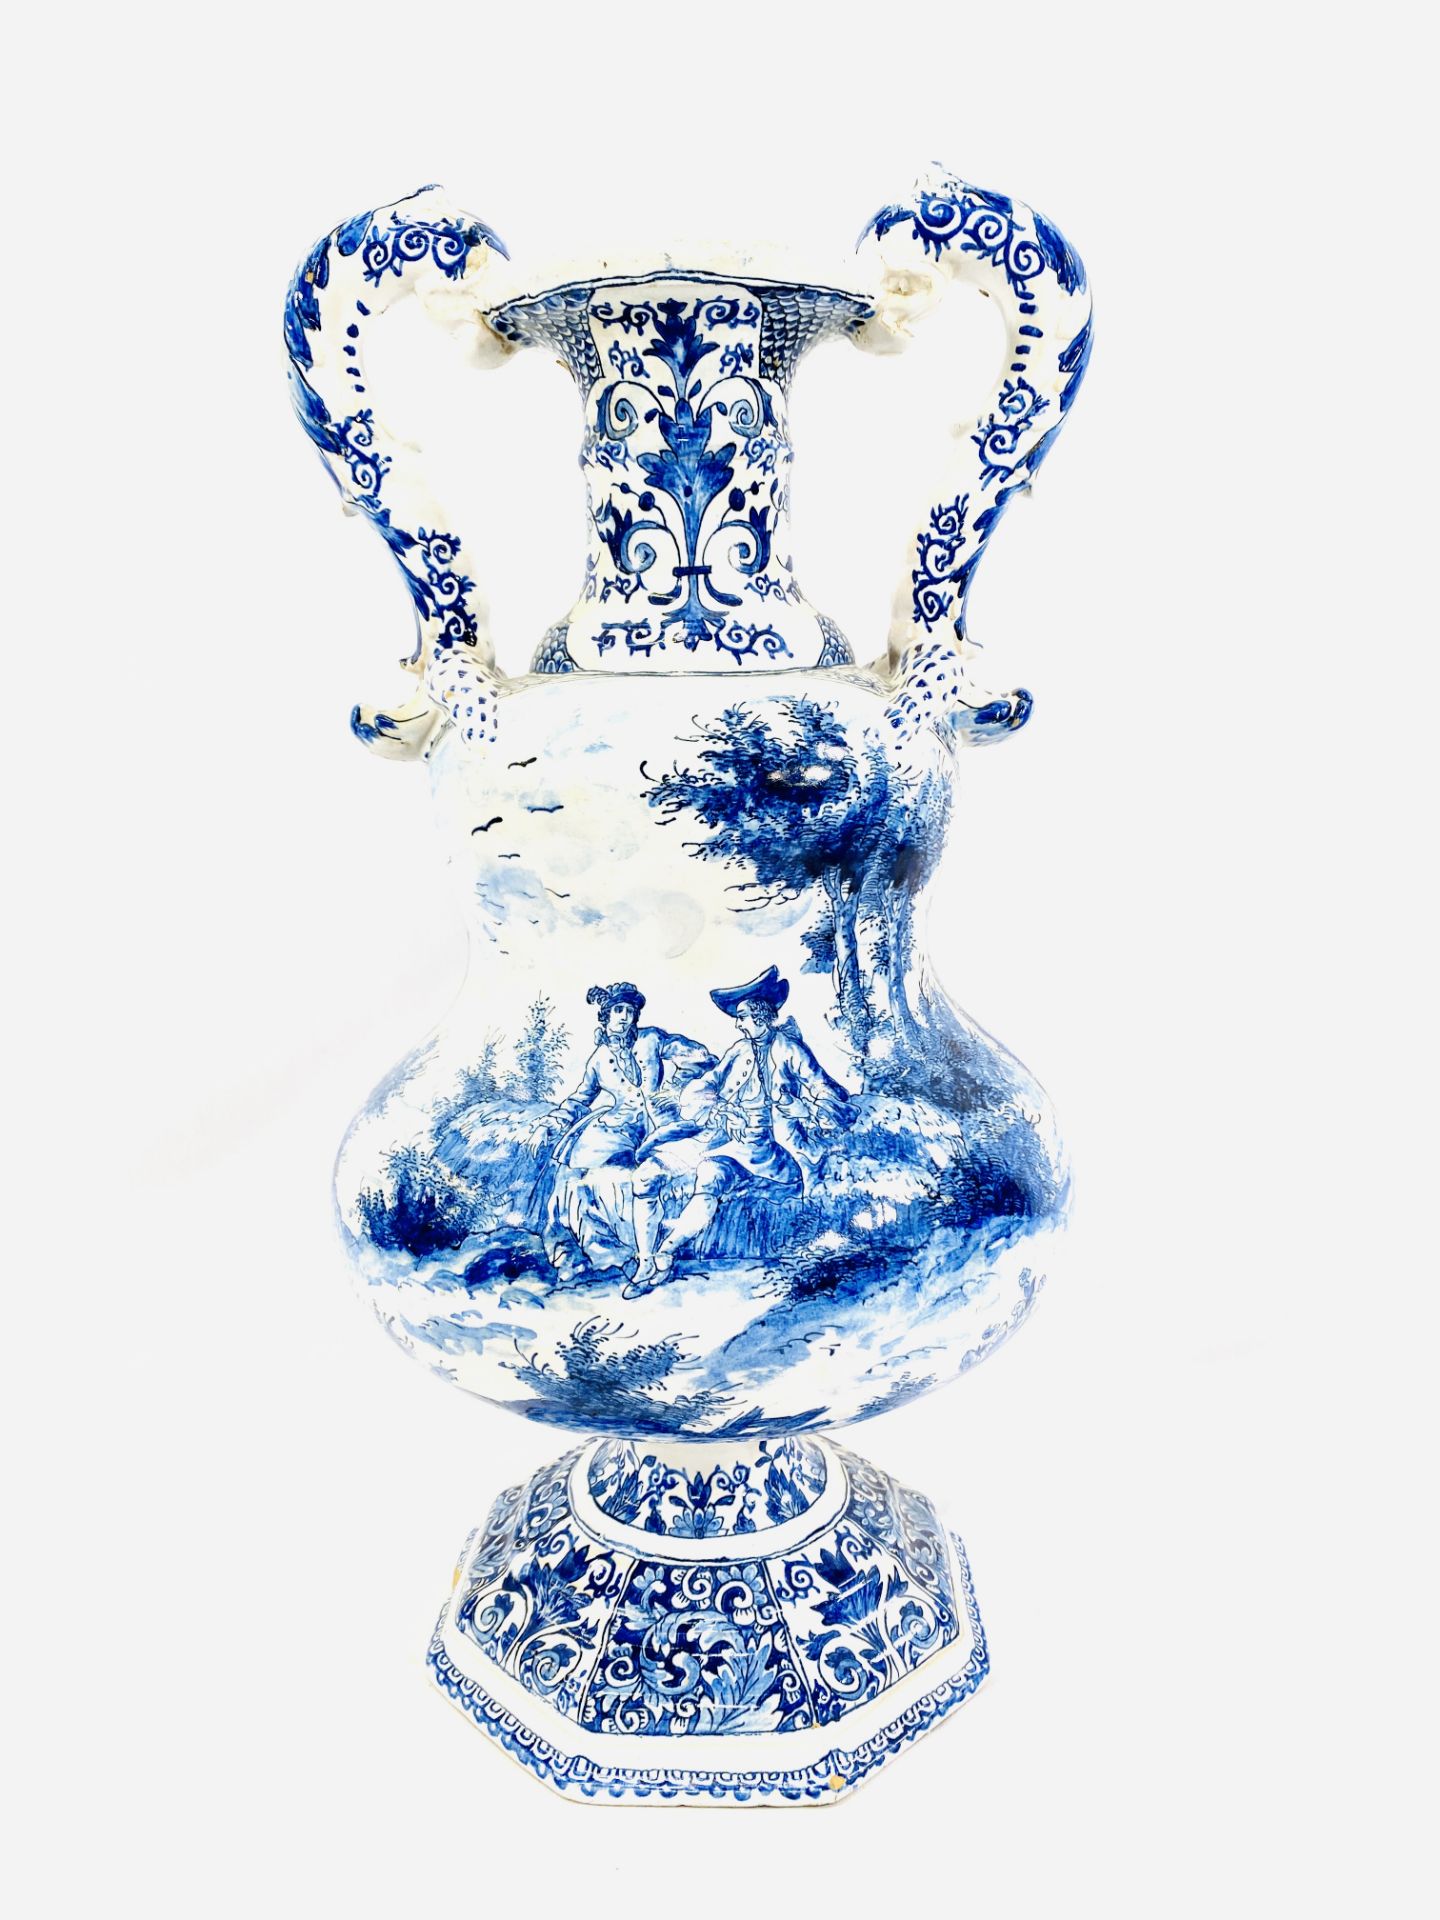 Pair of Delft vases - Image 5 of 5